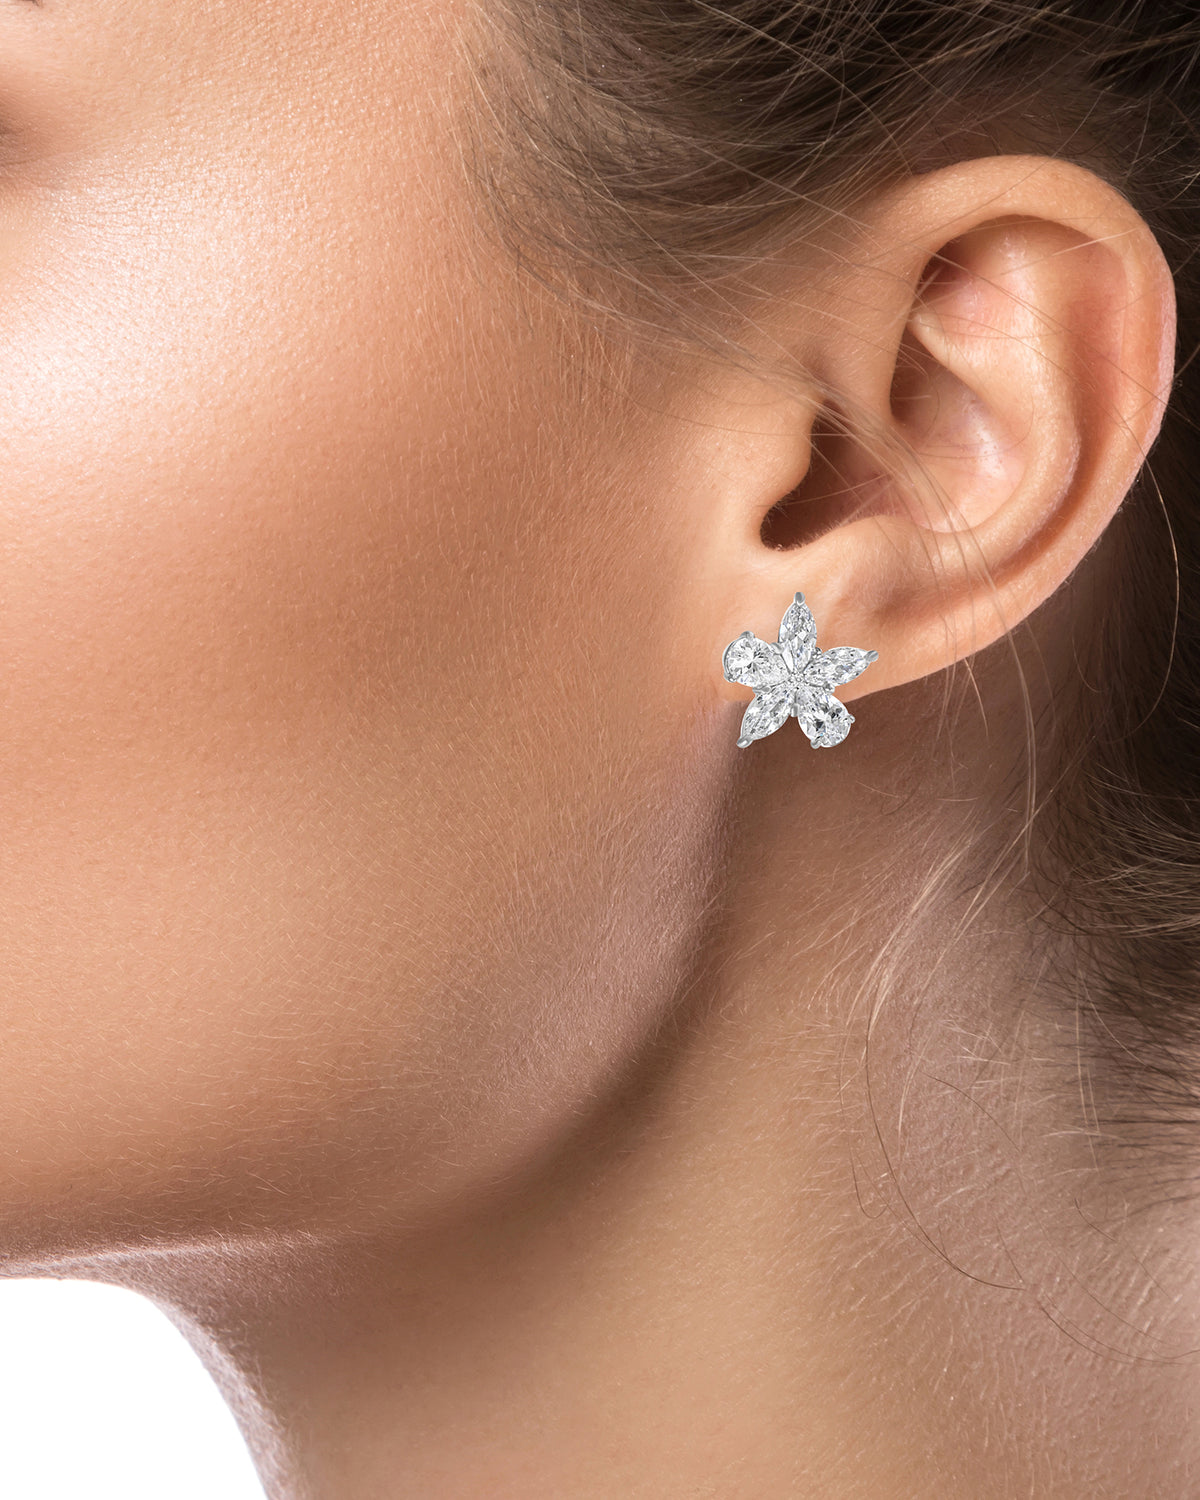 Pear and Marquise Shaped Stud Earrings